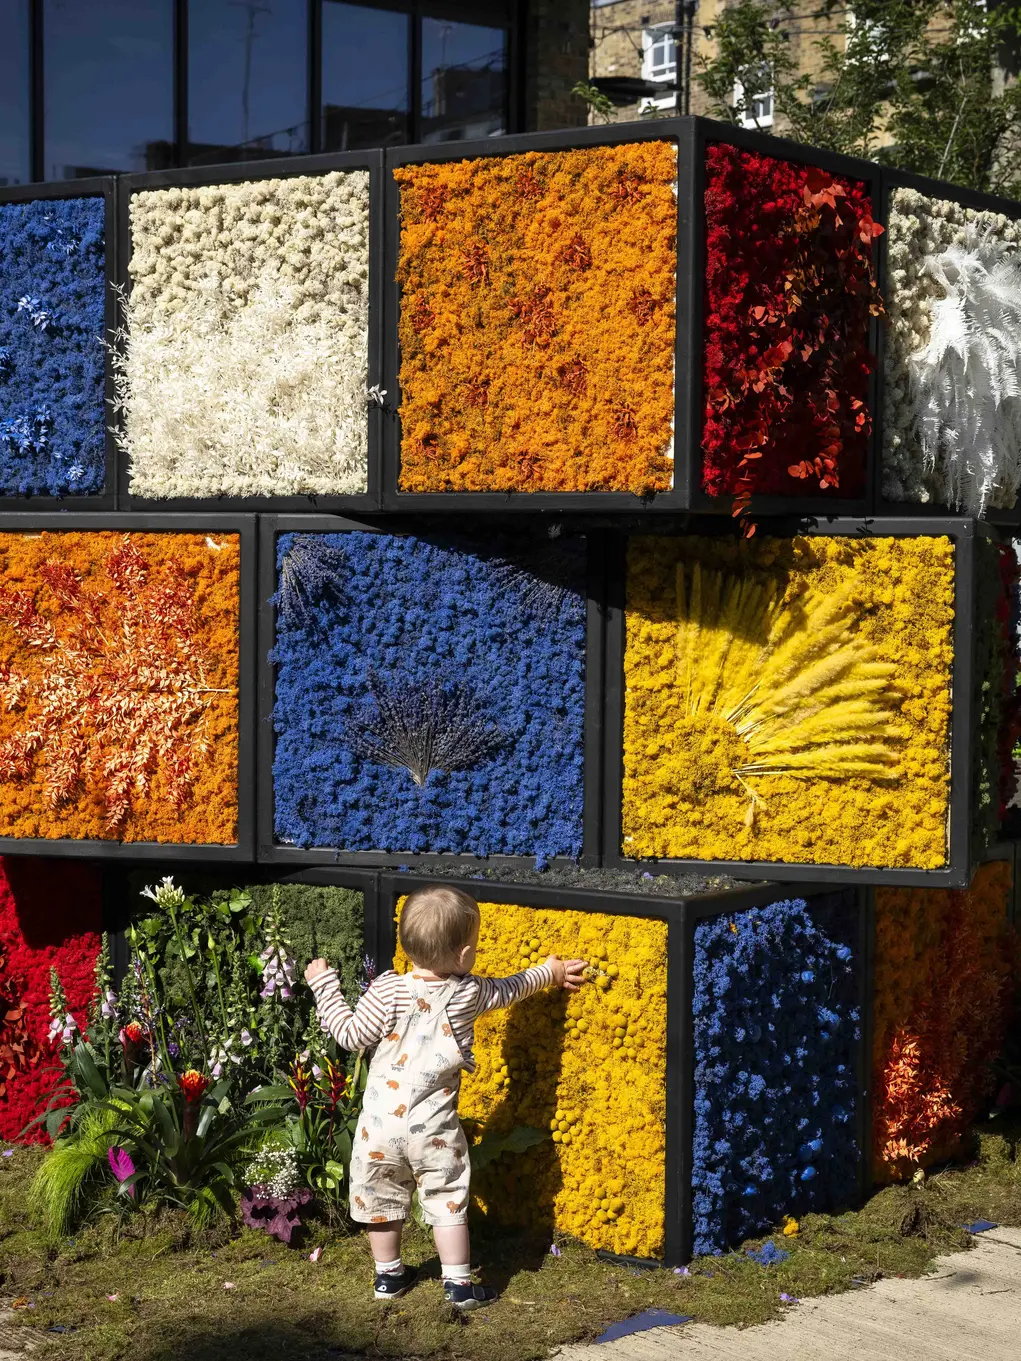 A toddler next to the Rubik's Cube floral display